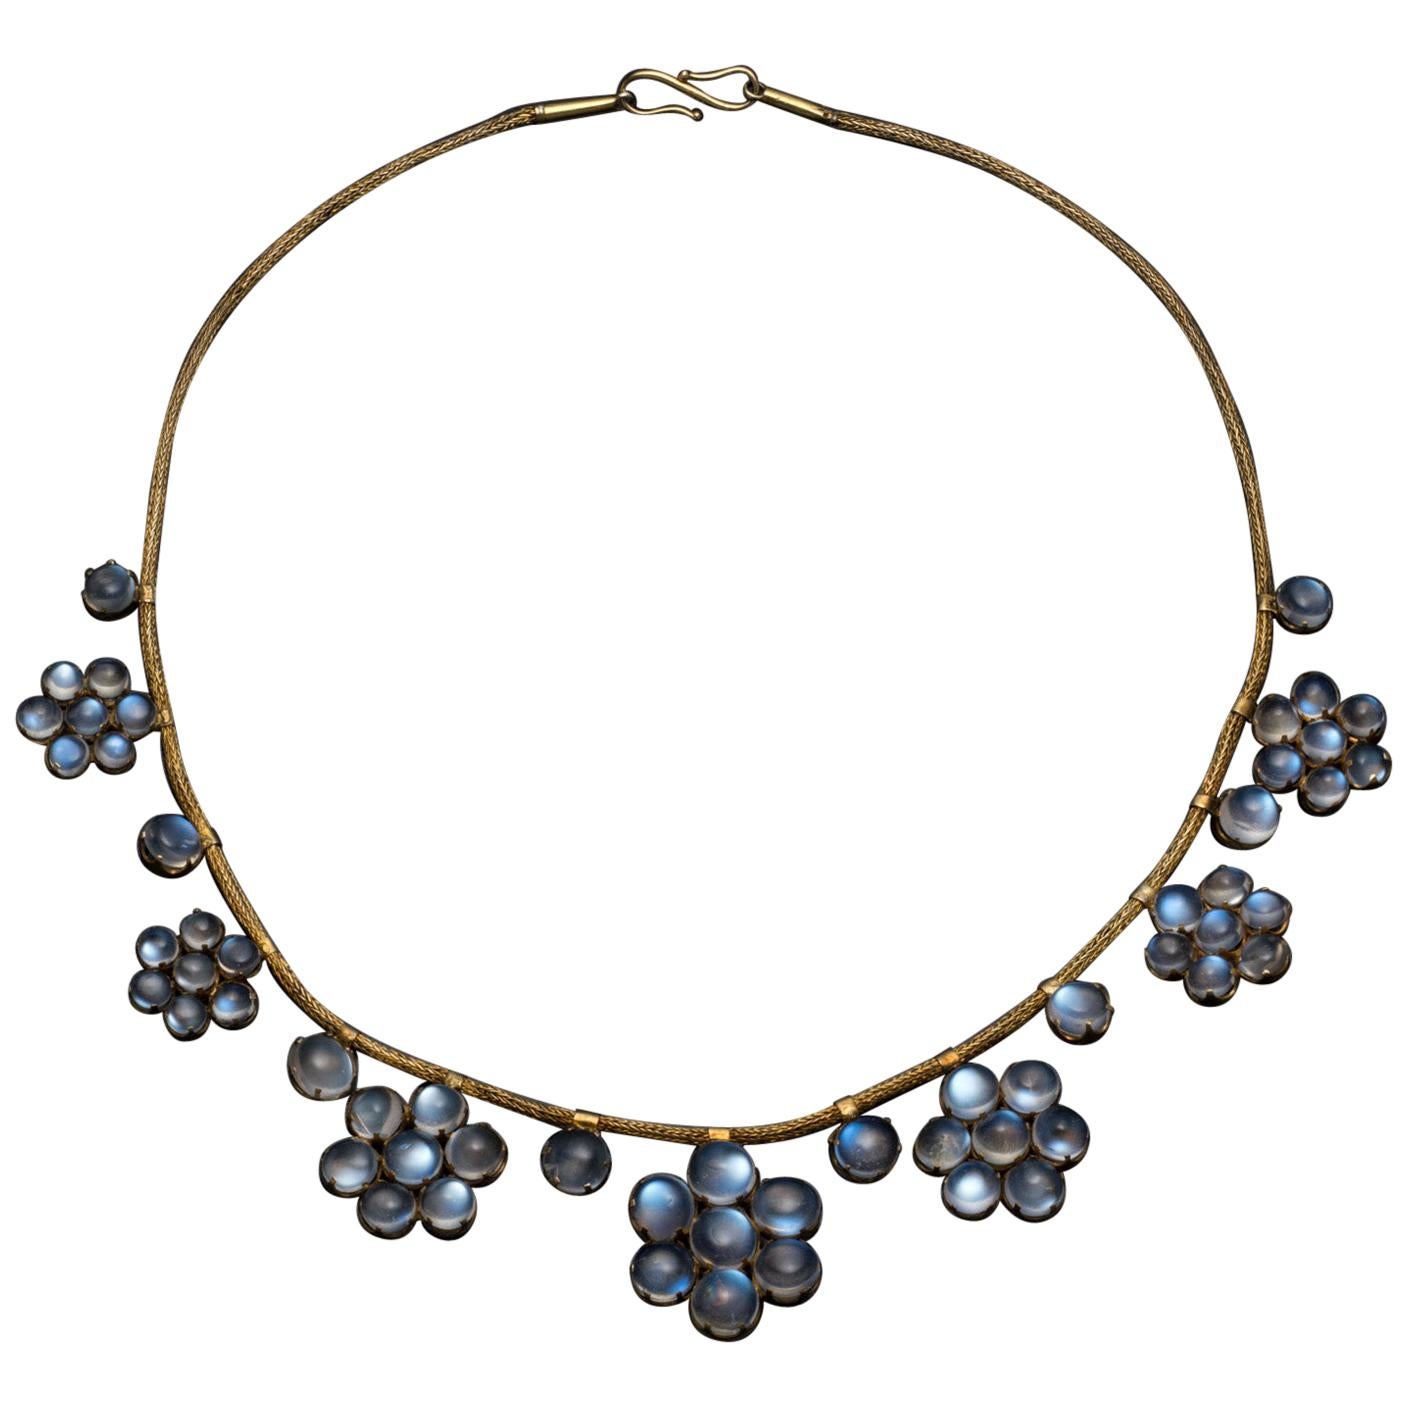 Antique Moonstone and Gold Necklace, English